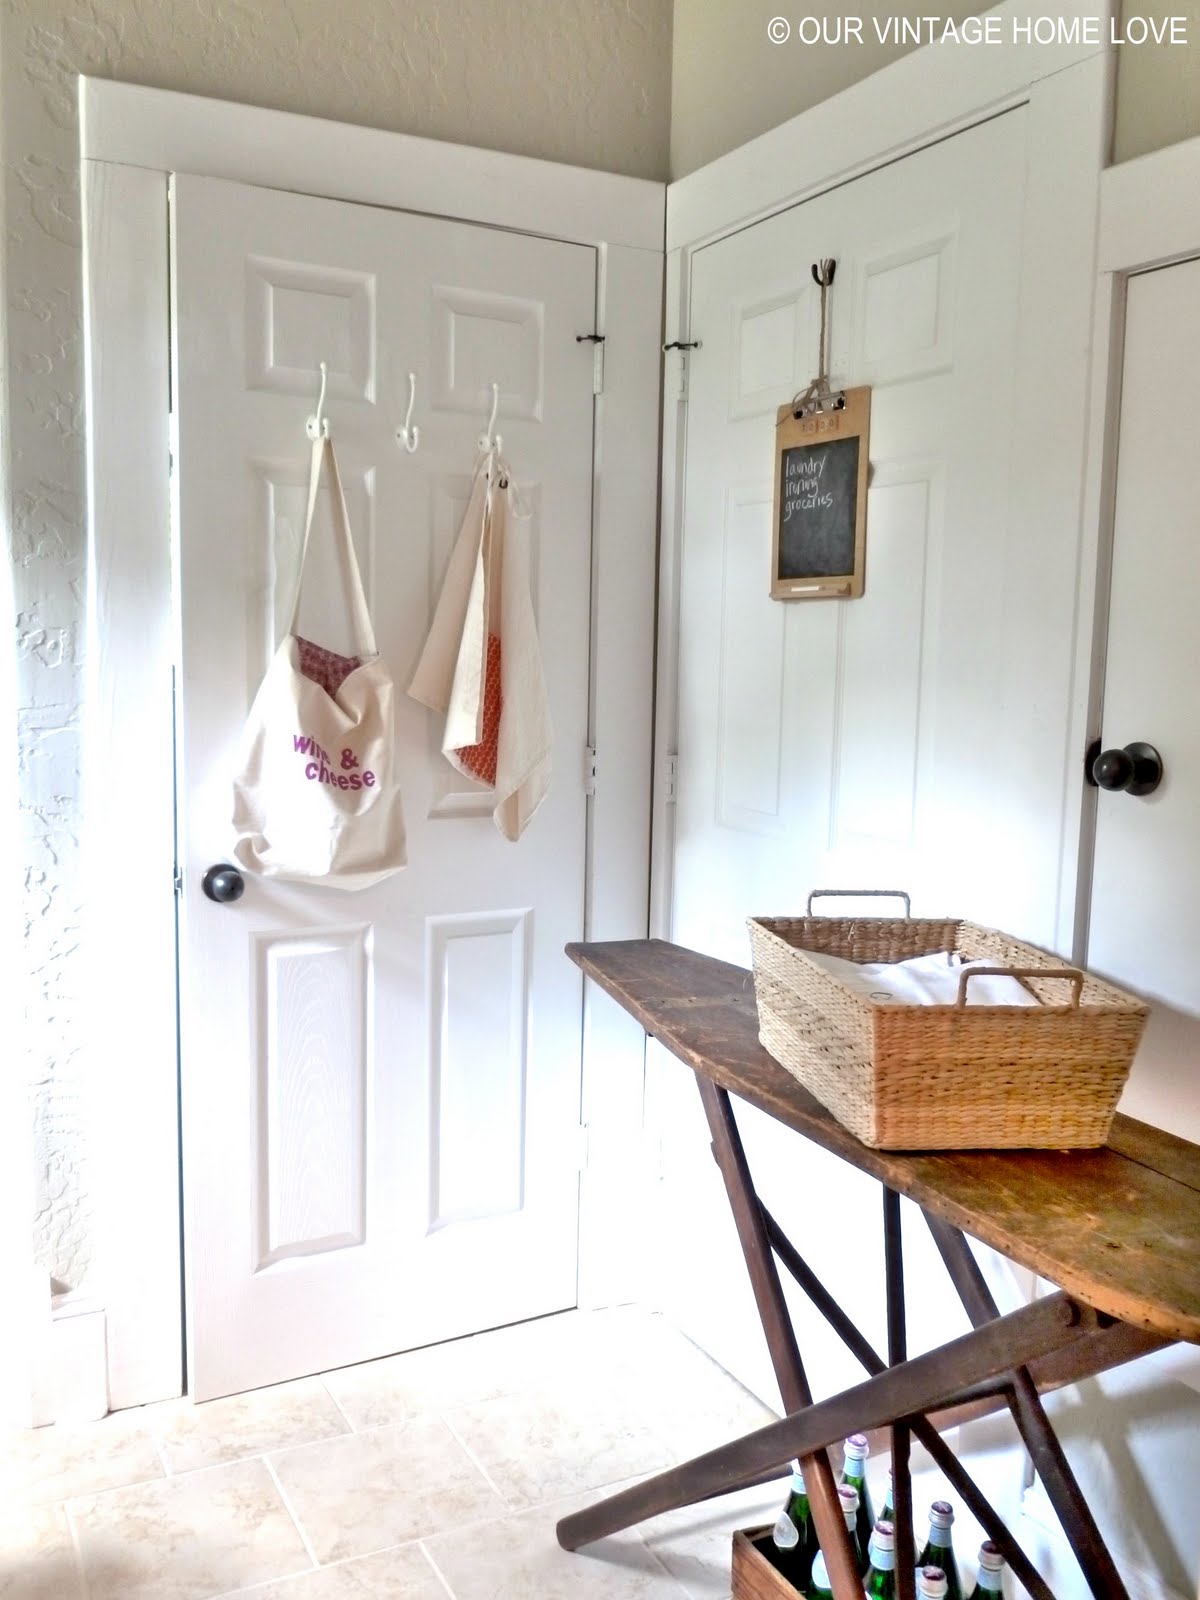 vintage home love: Laundry Room Ideas and a Vintage ...